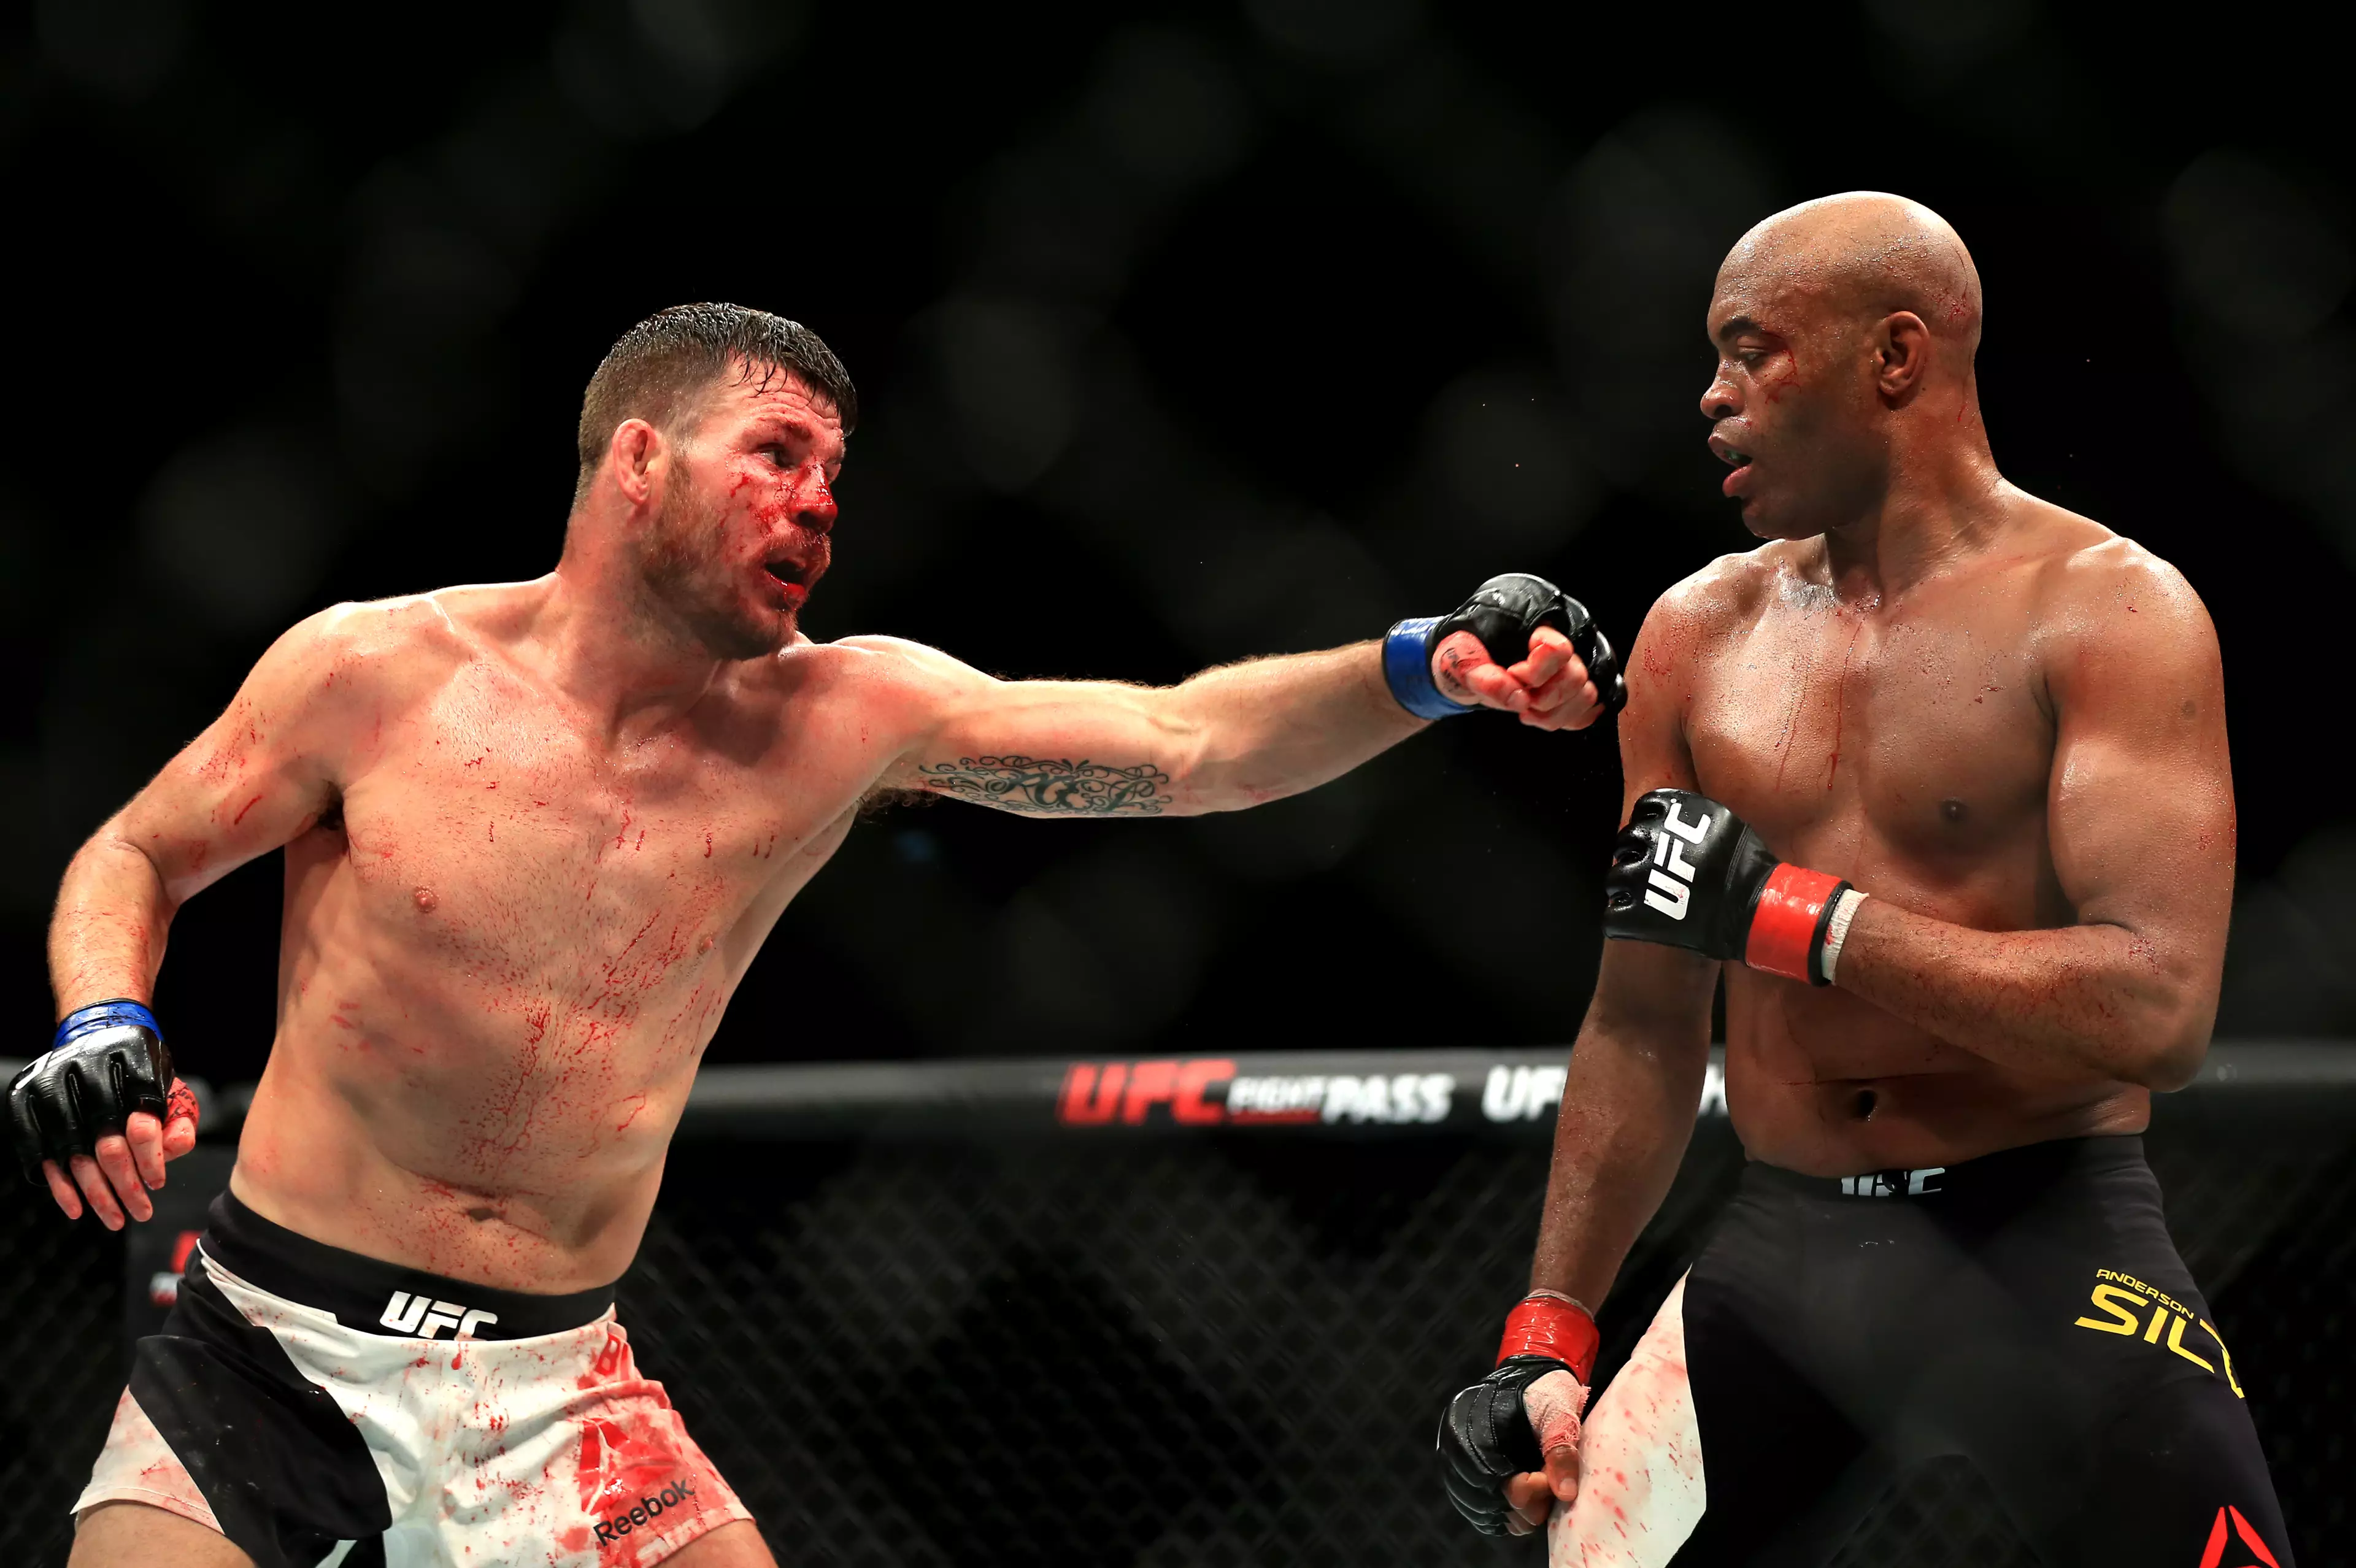 One of Silva's recent losses was against Brit Michael Bisping. Image: PA Images